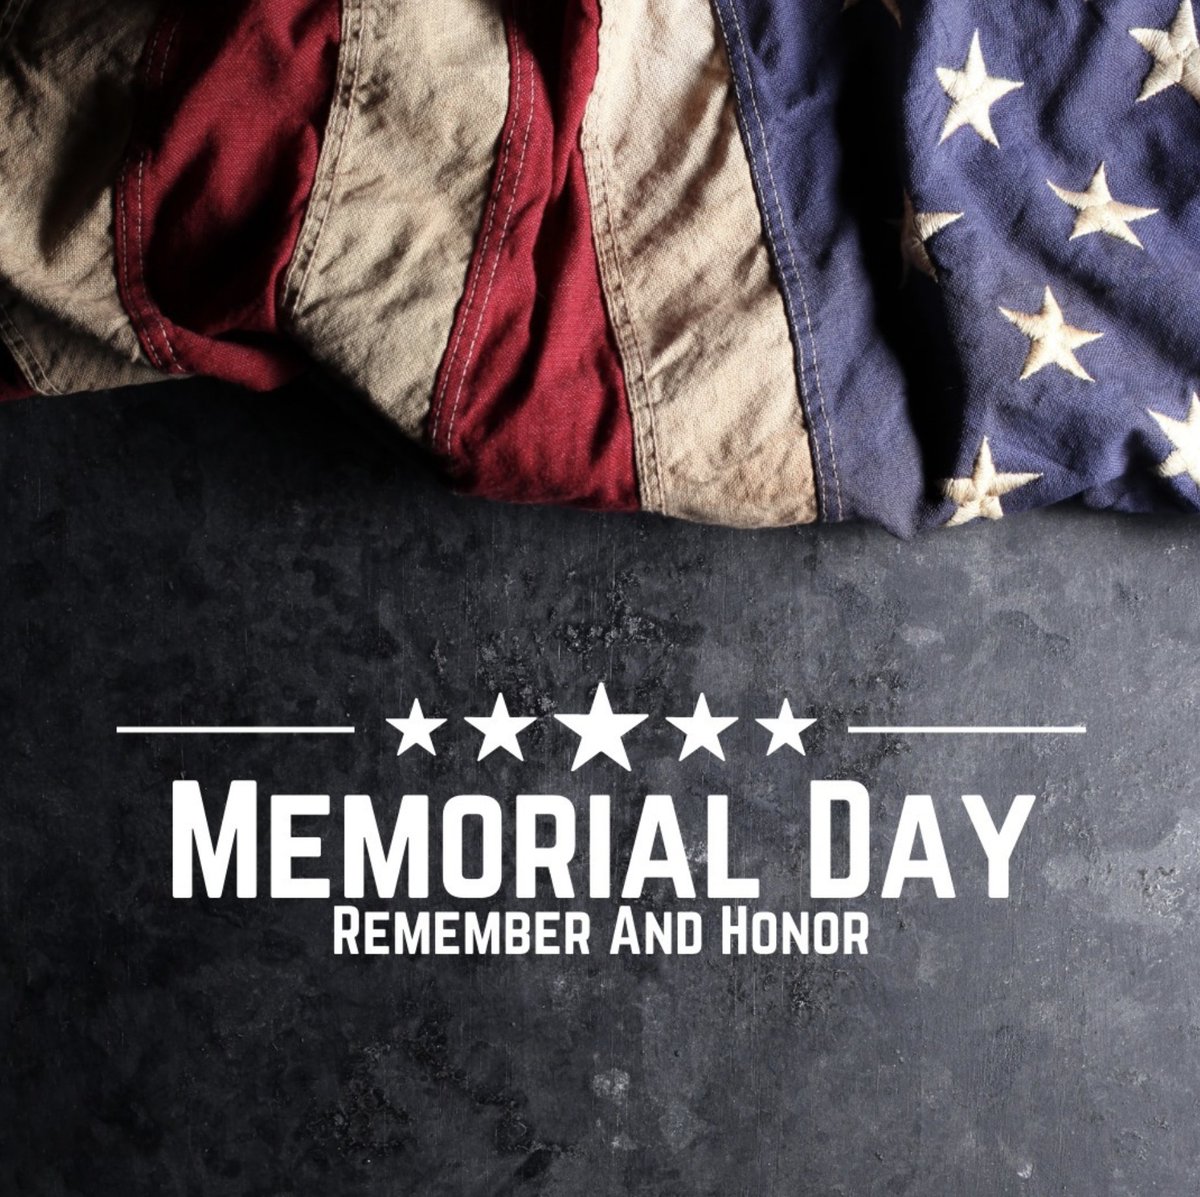 Our Core Gaming team would like to wish you all a wonderful #MemorialDay ♥️🤍💙 Use MEMORIAL25 at check out for 25% off 🇺🇸 • • • #memorialdayweekend #usa #love #america #memorial